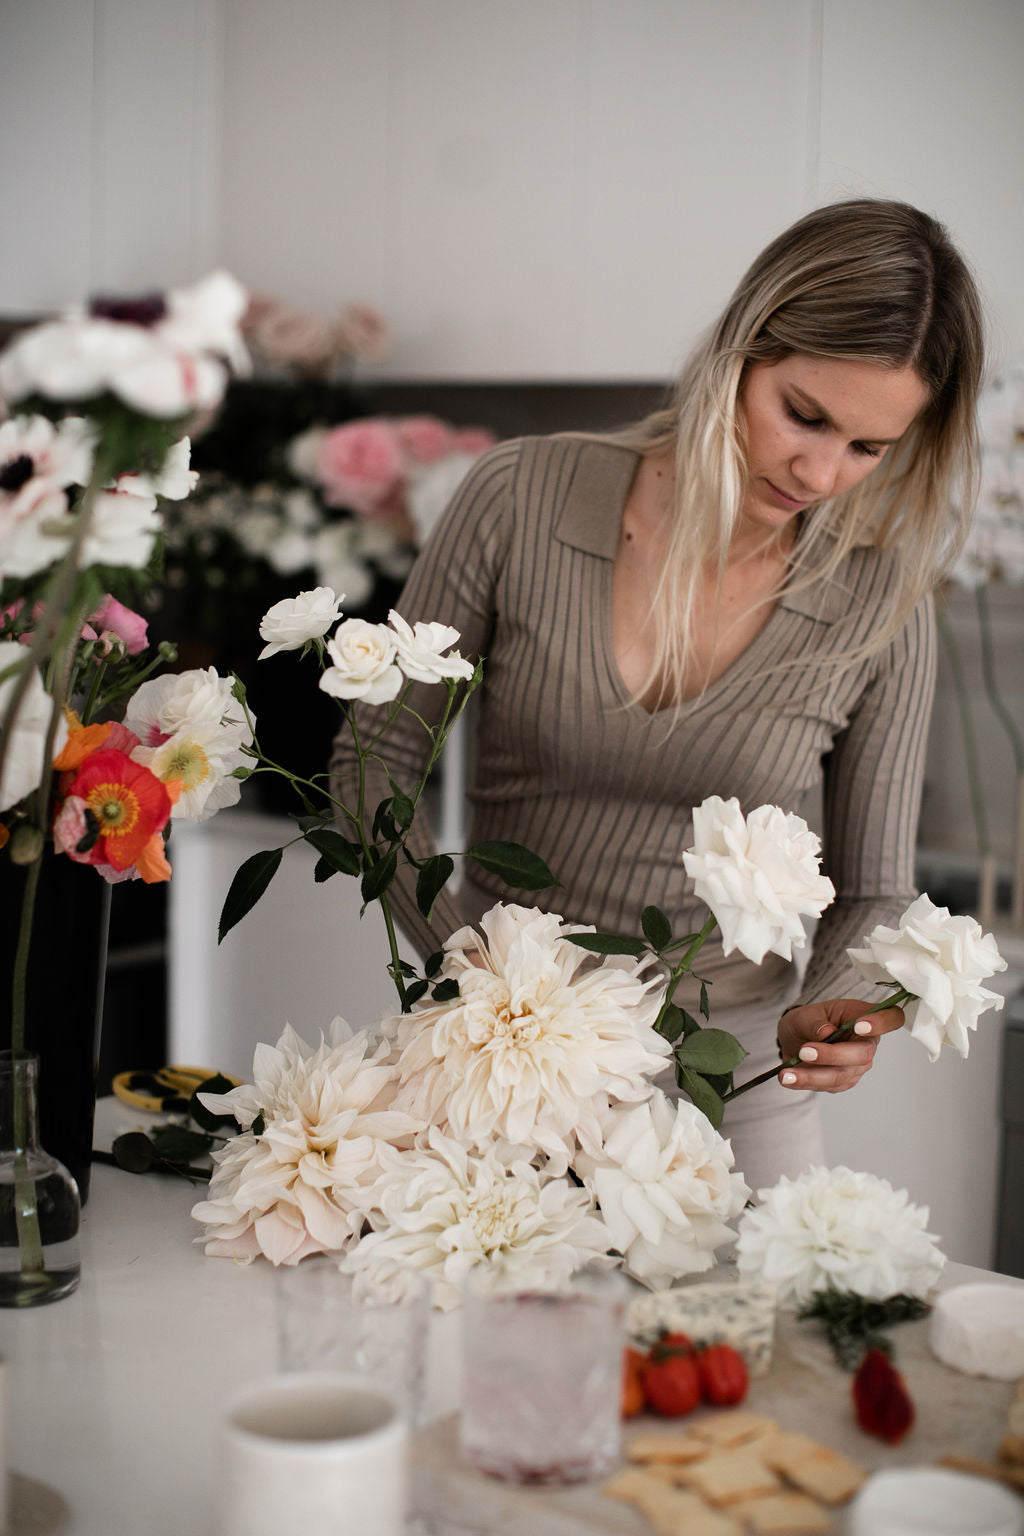 BY HAND, A HOW-TO GUIDE ON CREATING A FLORAL ARRANGEMENT WITH FLORAL STYLIST, FIFLAR